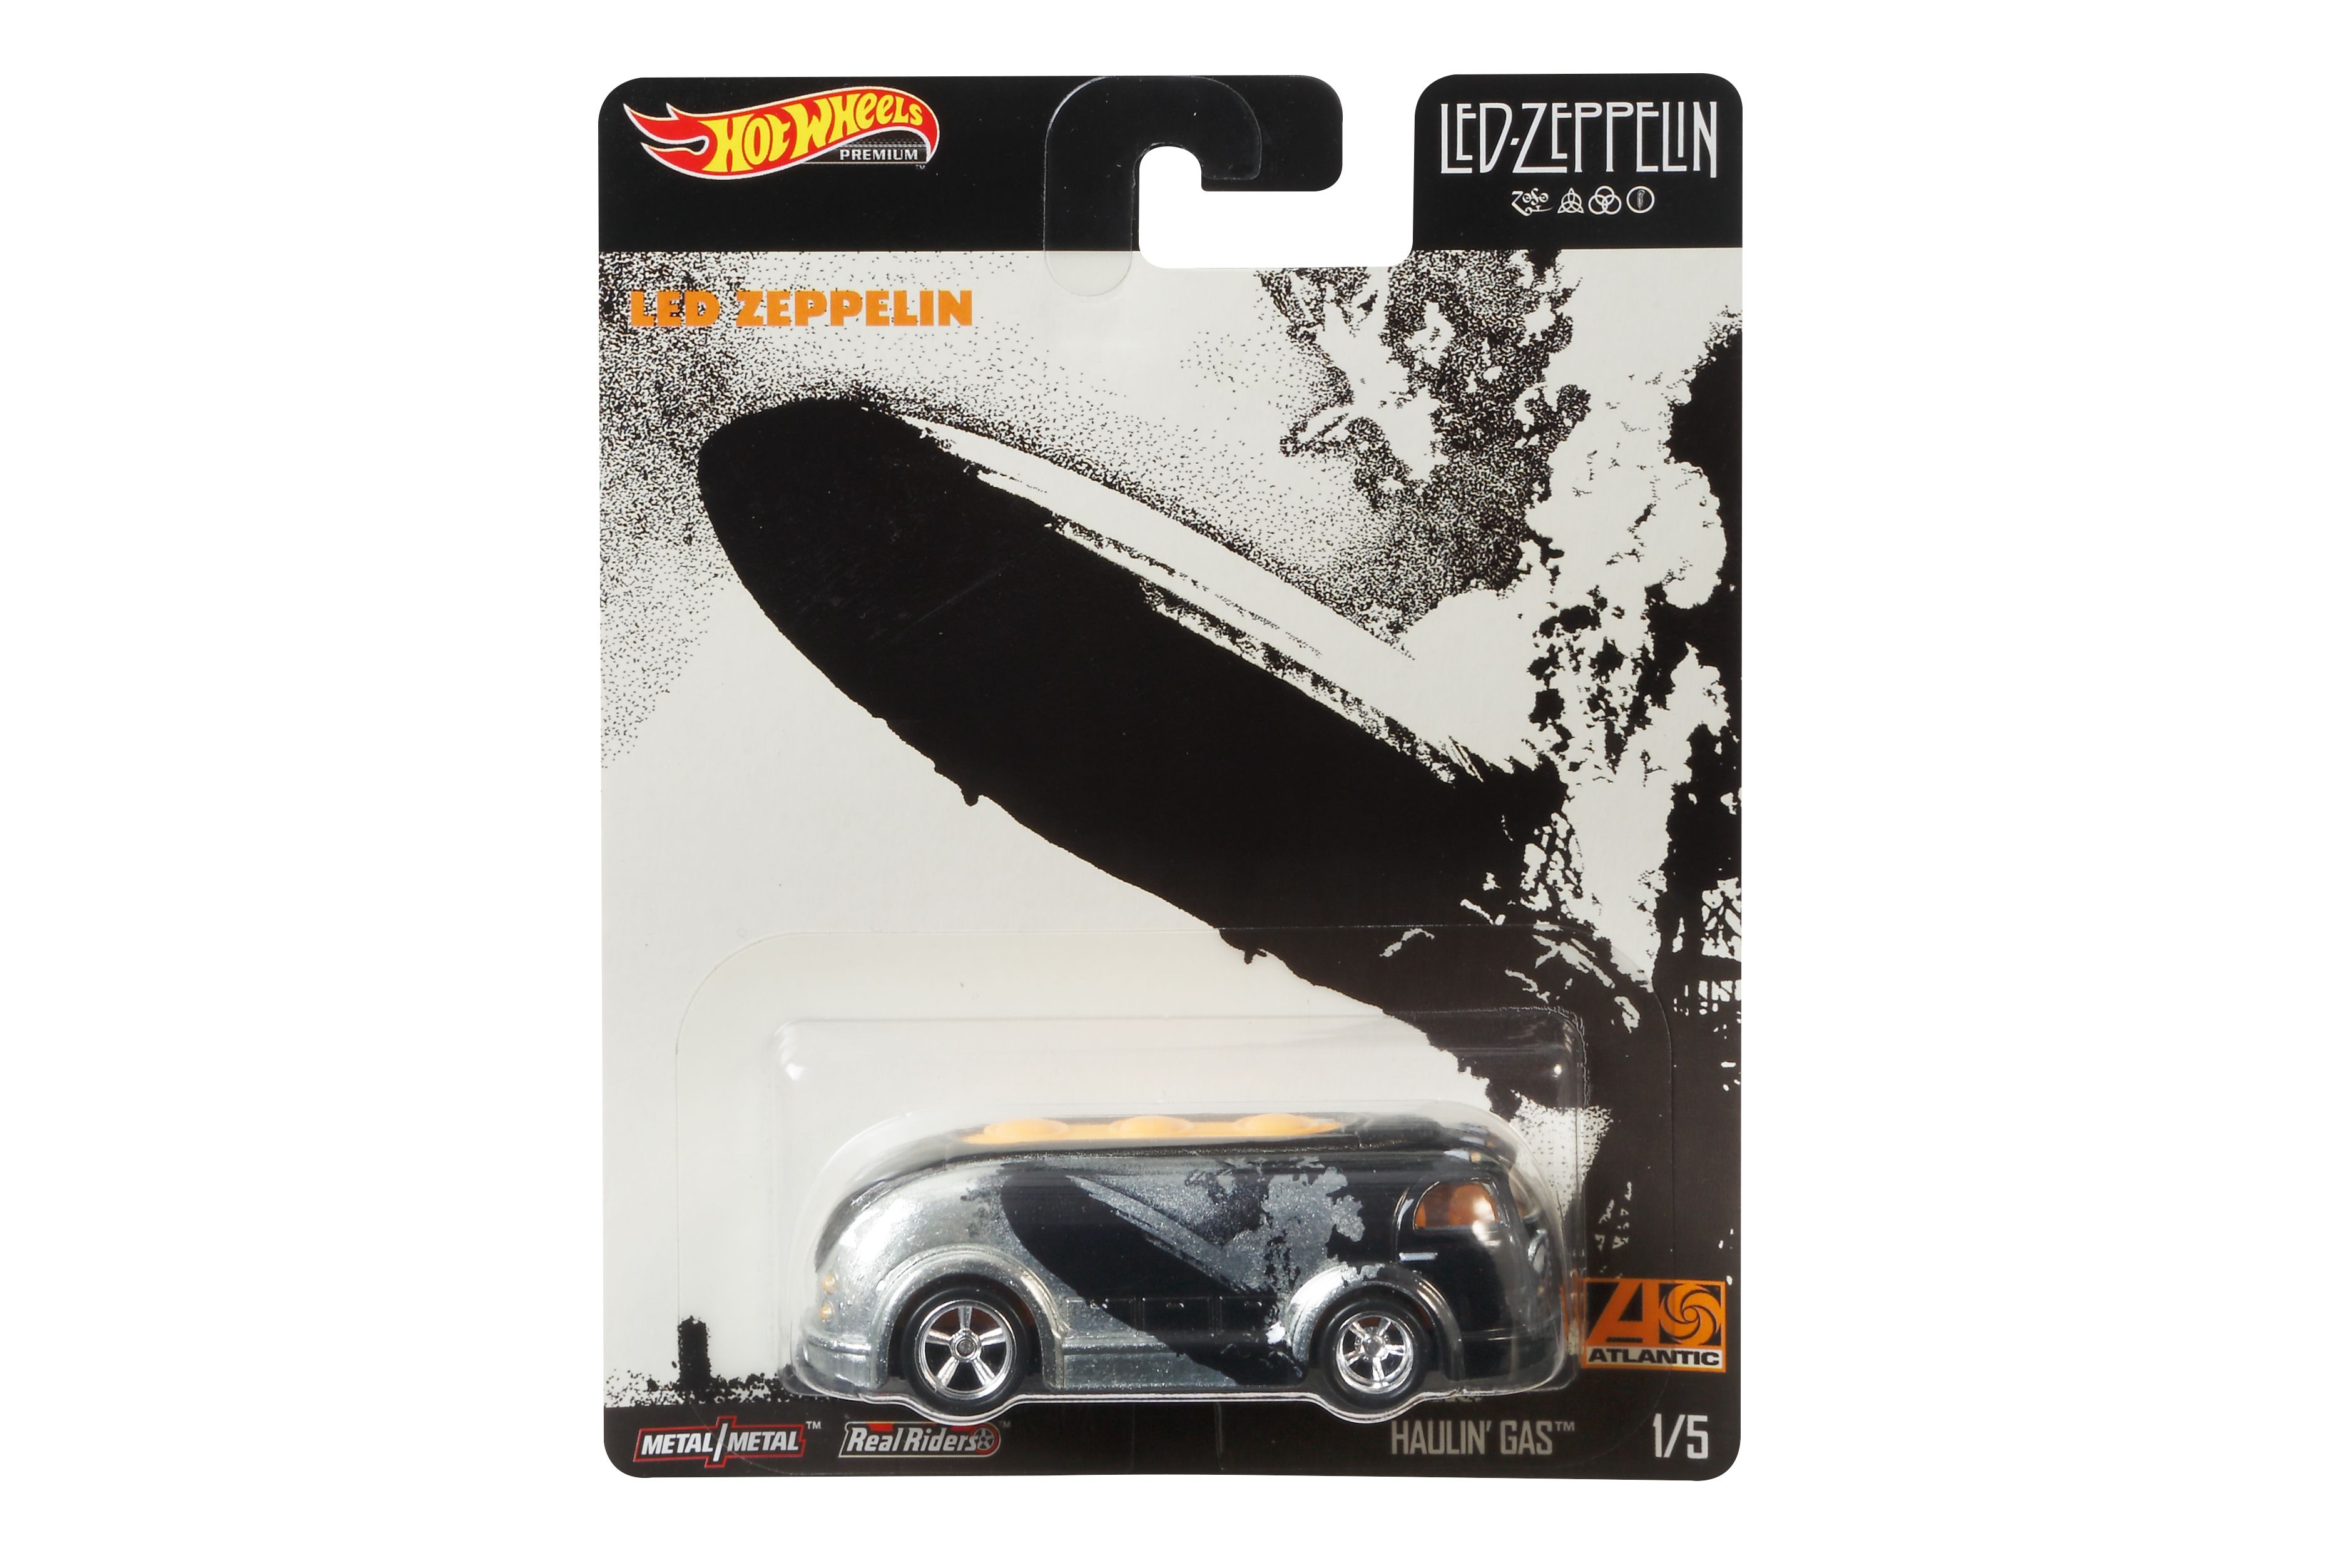 Sump blad Antologi Hot Wheels Pays Tribute to Led Zeppelin with 5 Special-Edition Models